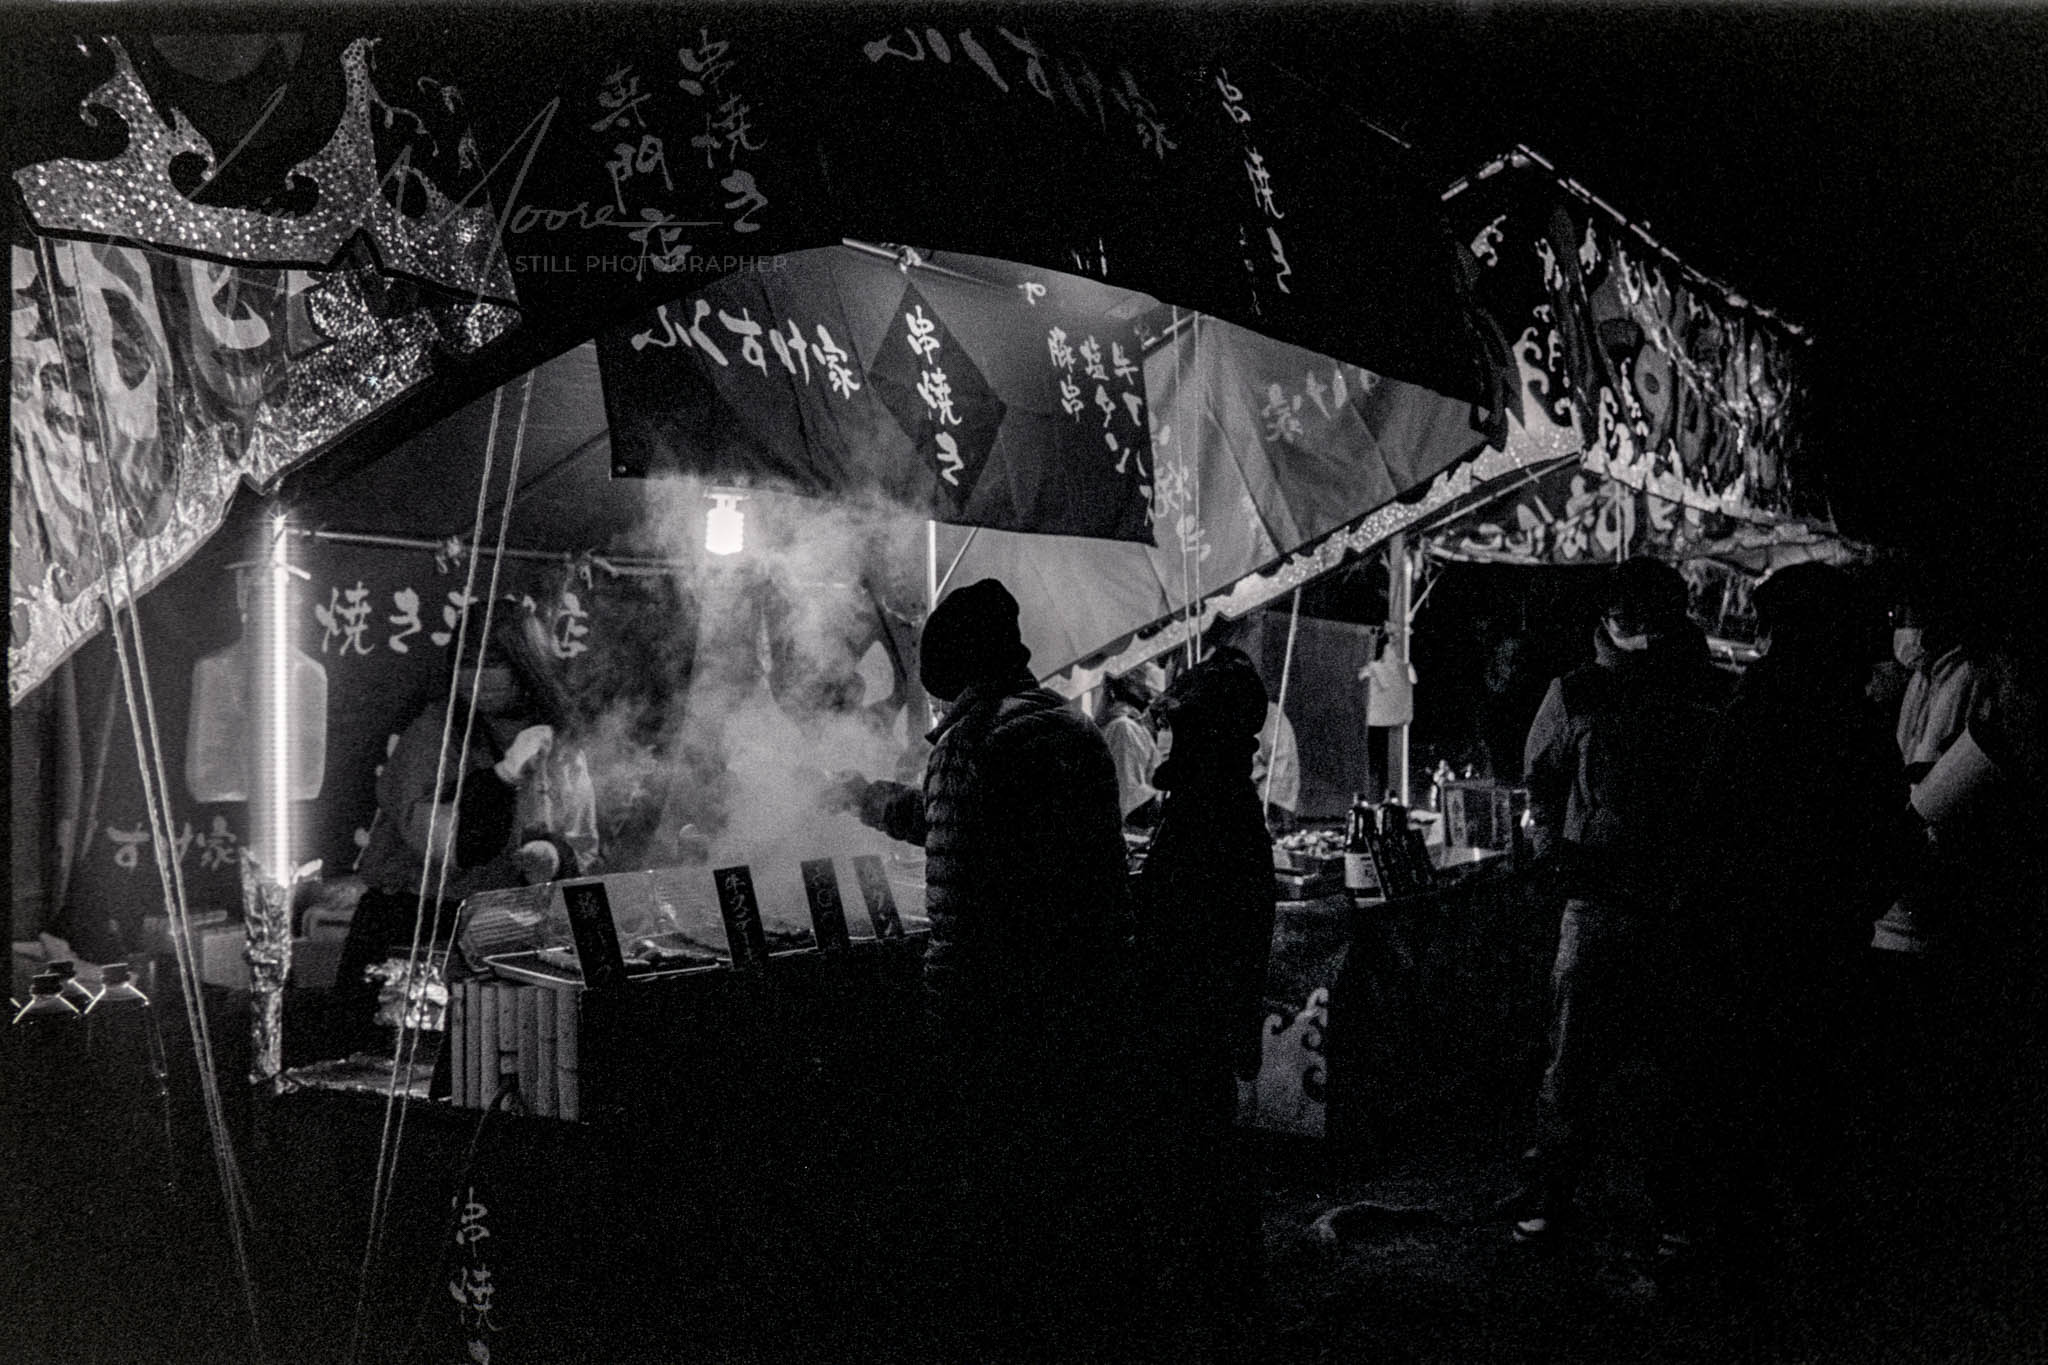 Bustling night market scene with illuminated food stall and customer silhouettes in black and white.